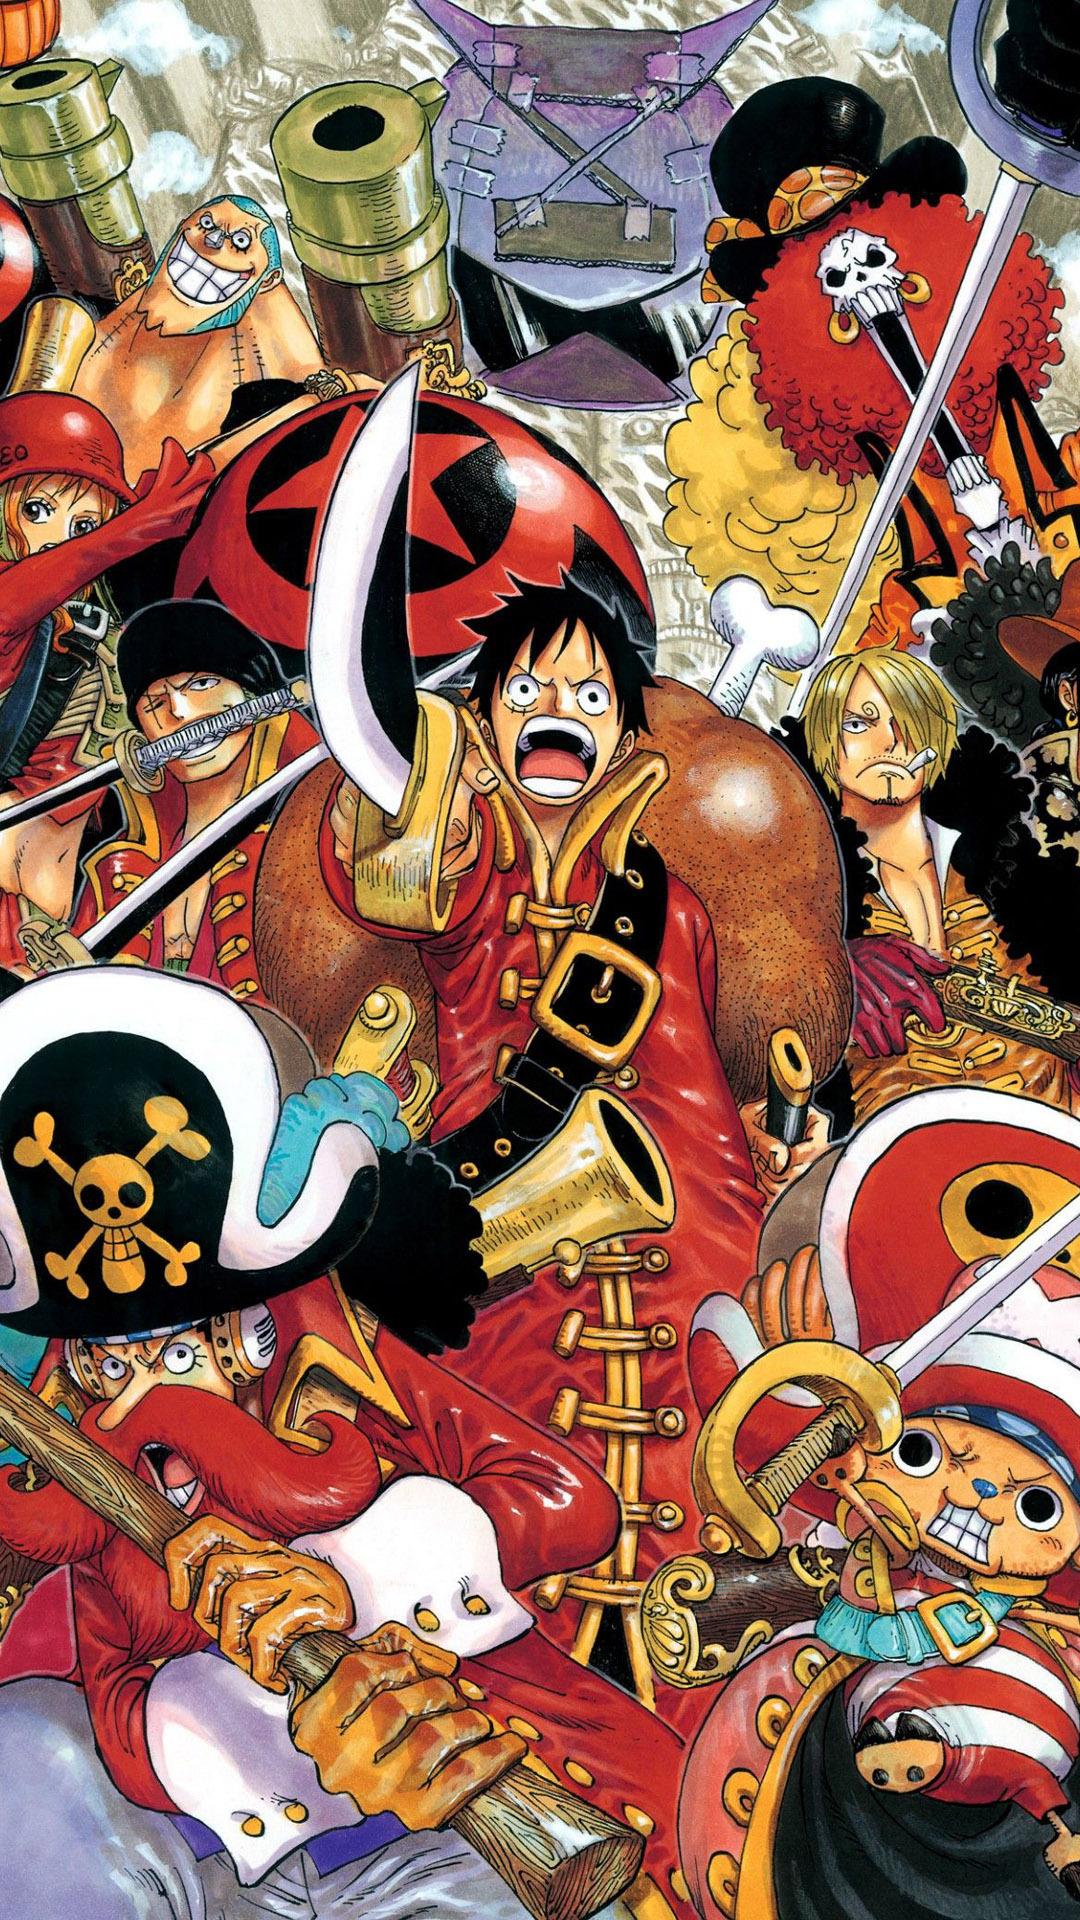 200+] One Piece Iphone Wallpapers